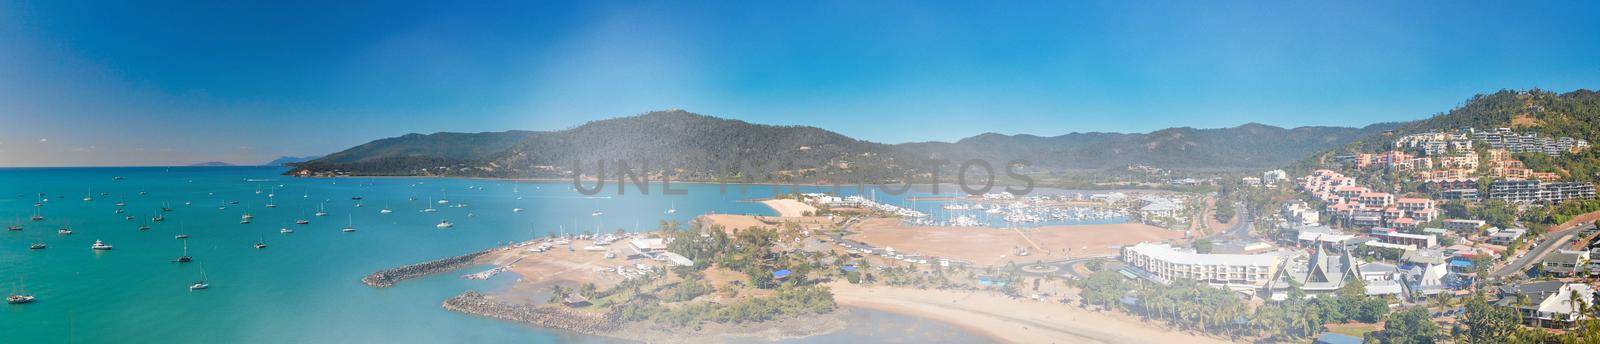 Panoramic aerial view of Airlie Beach on a beautiful sunny day by jovannig